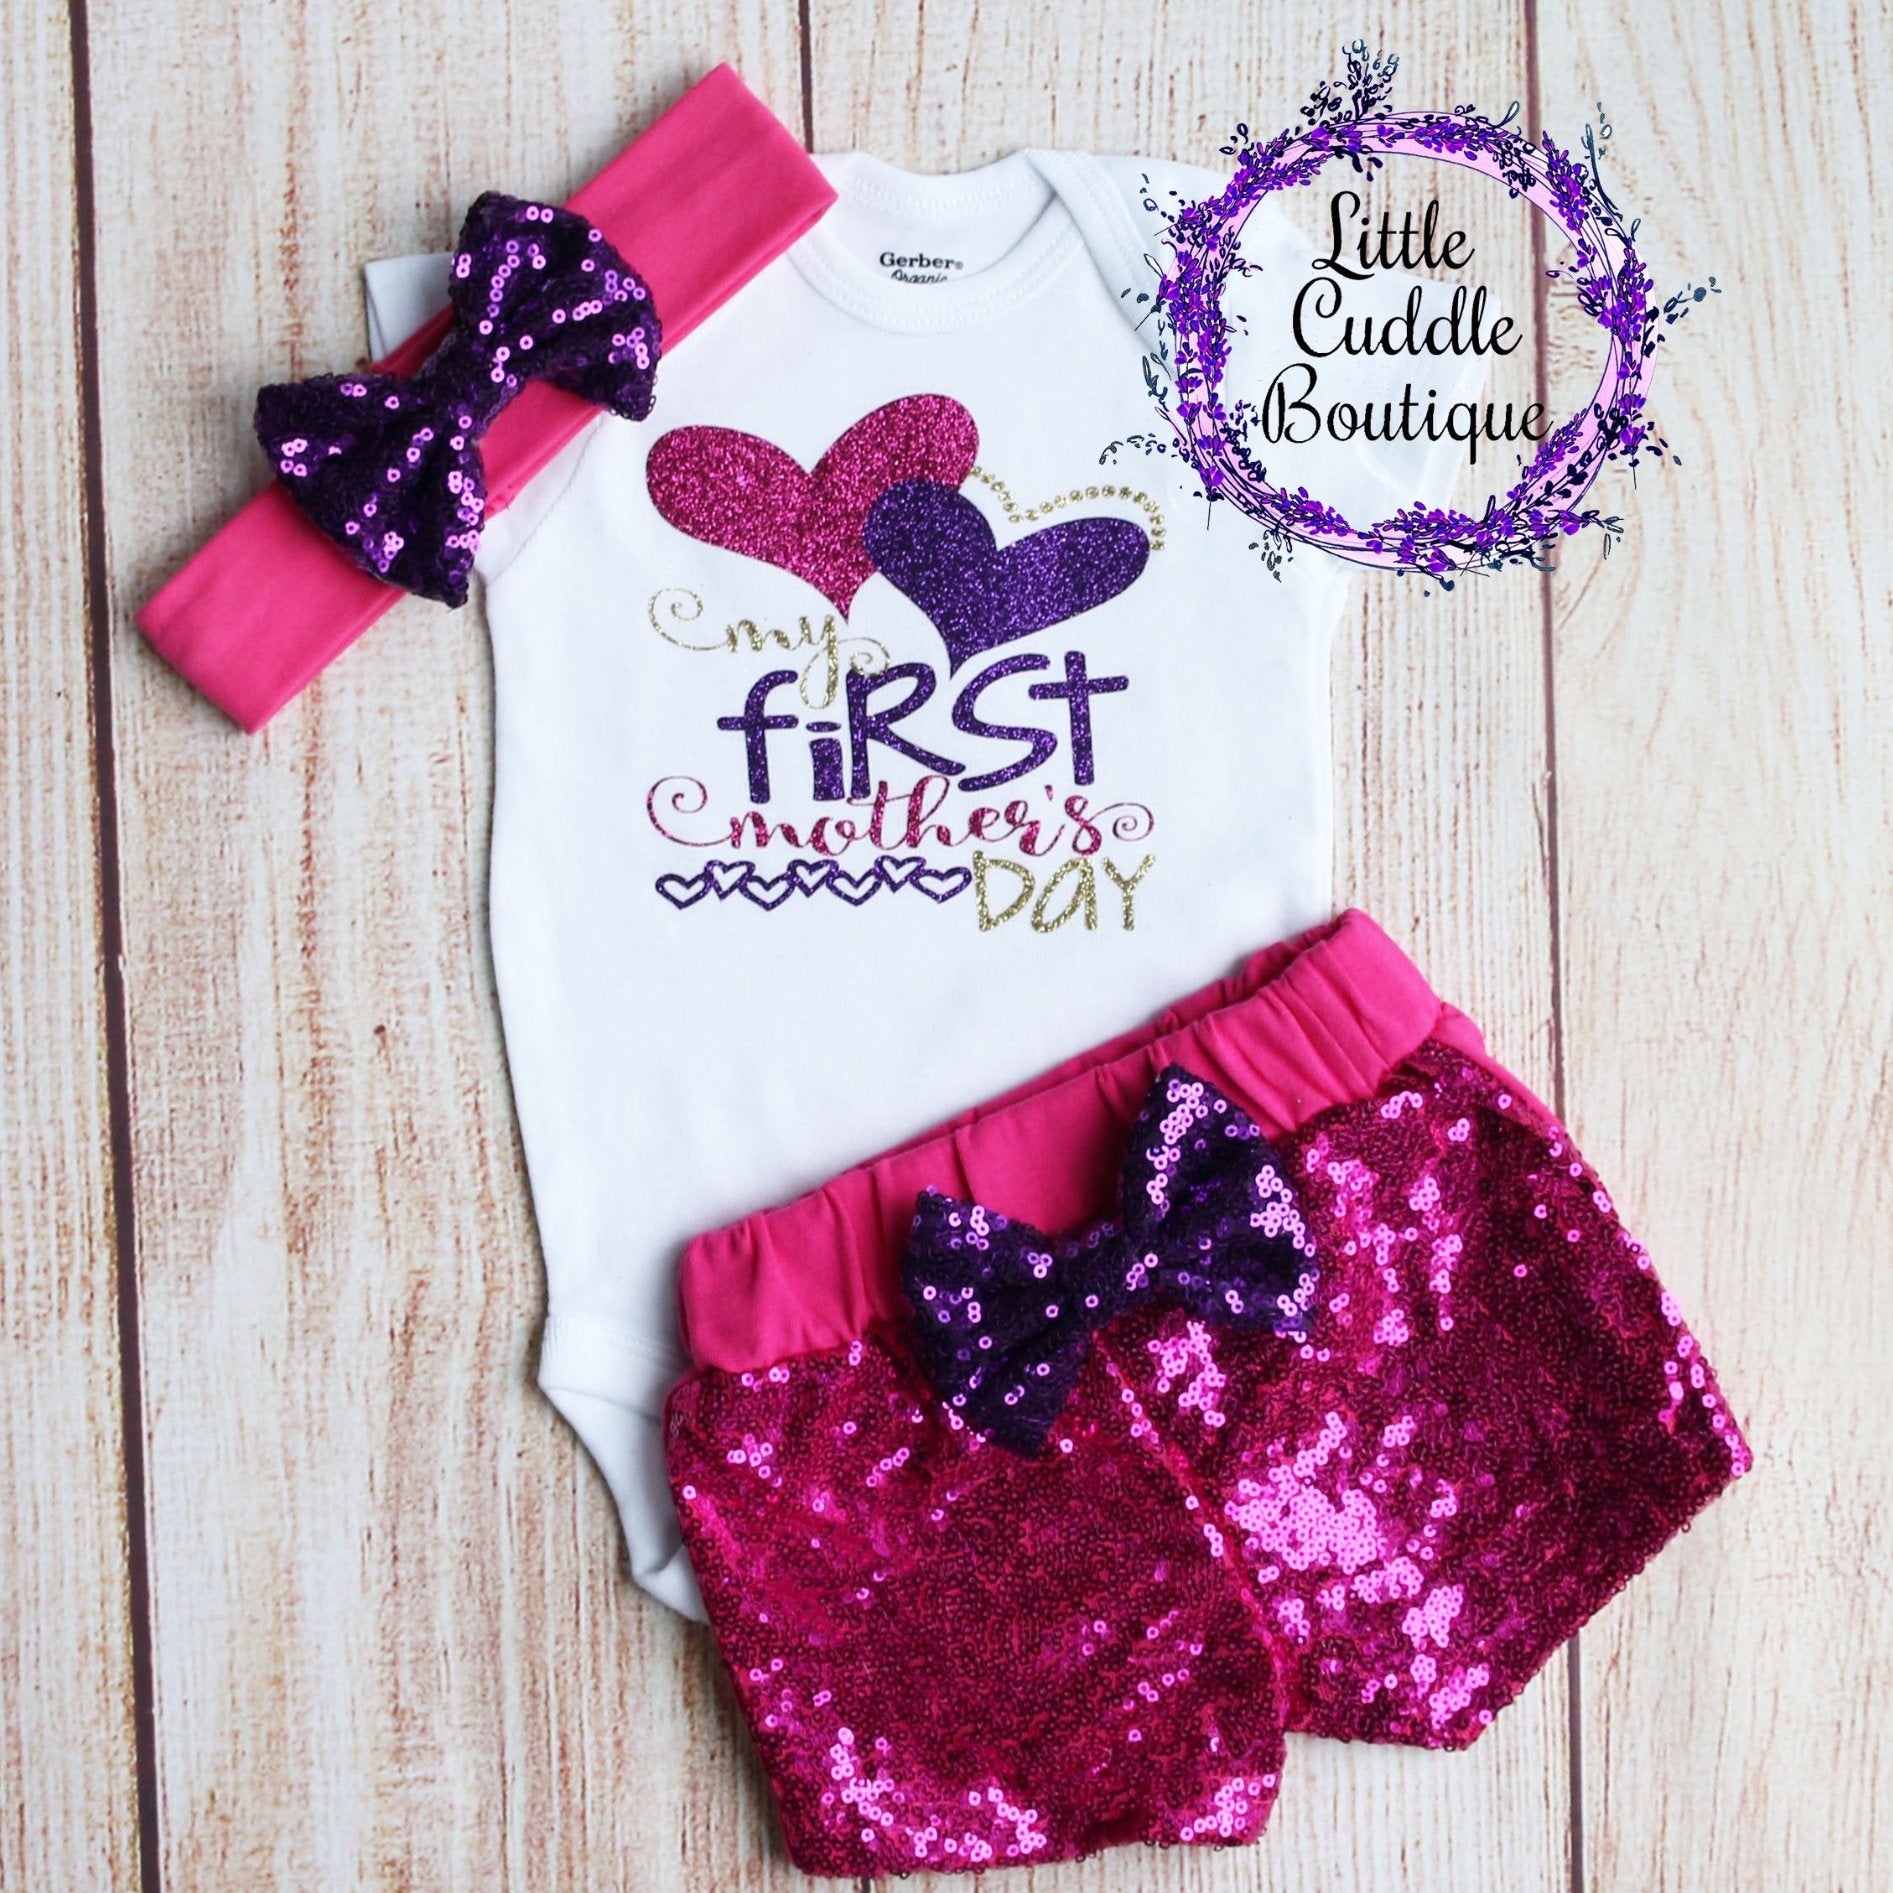 mothers day baby clothes